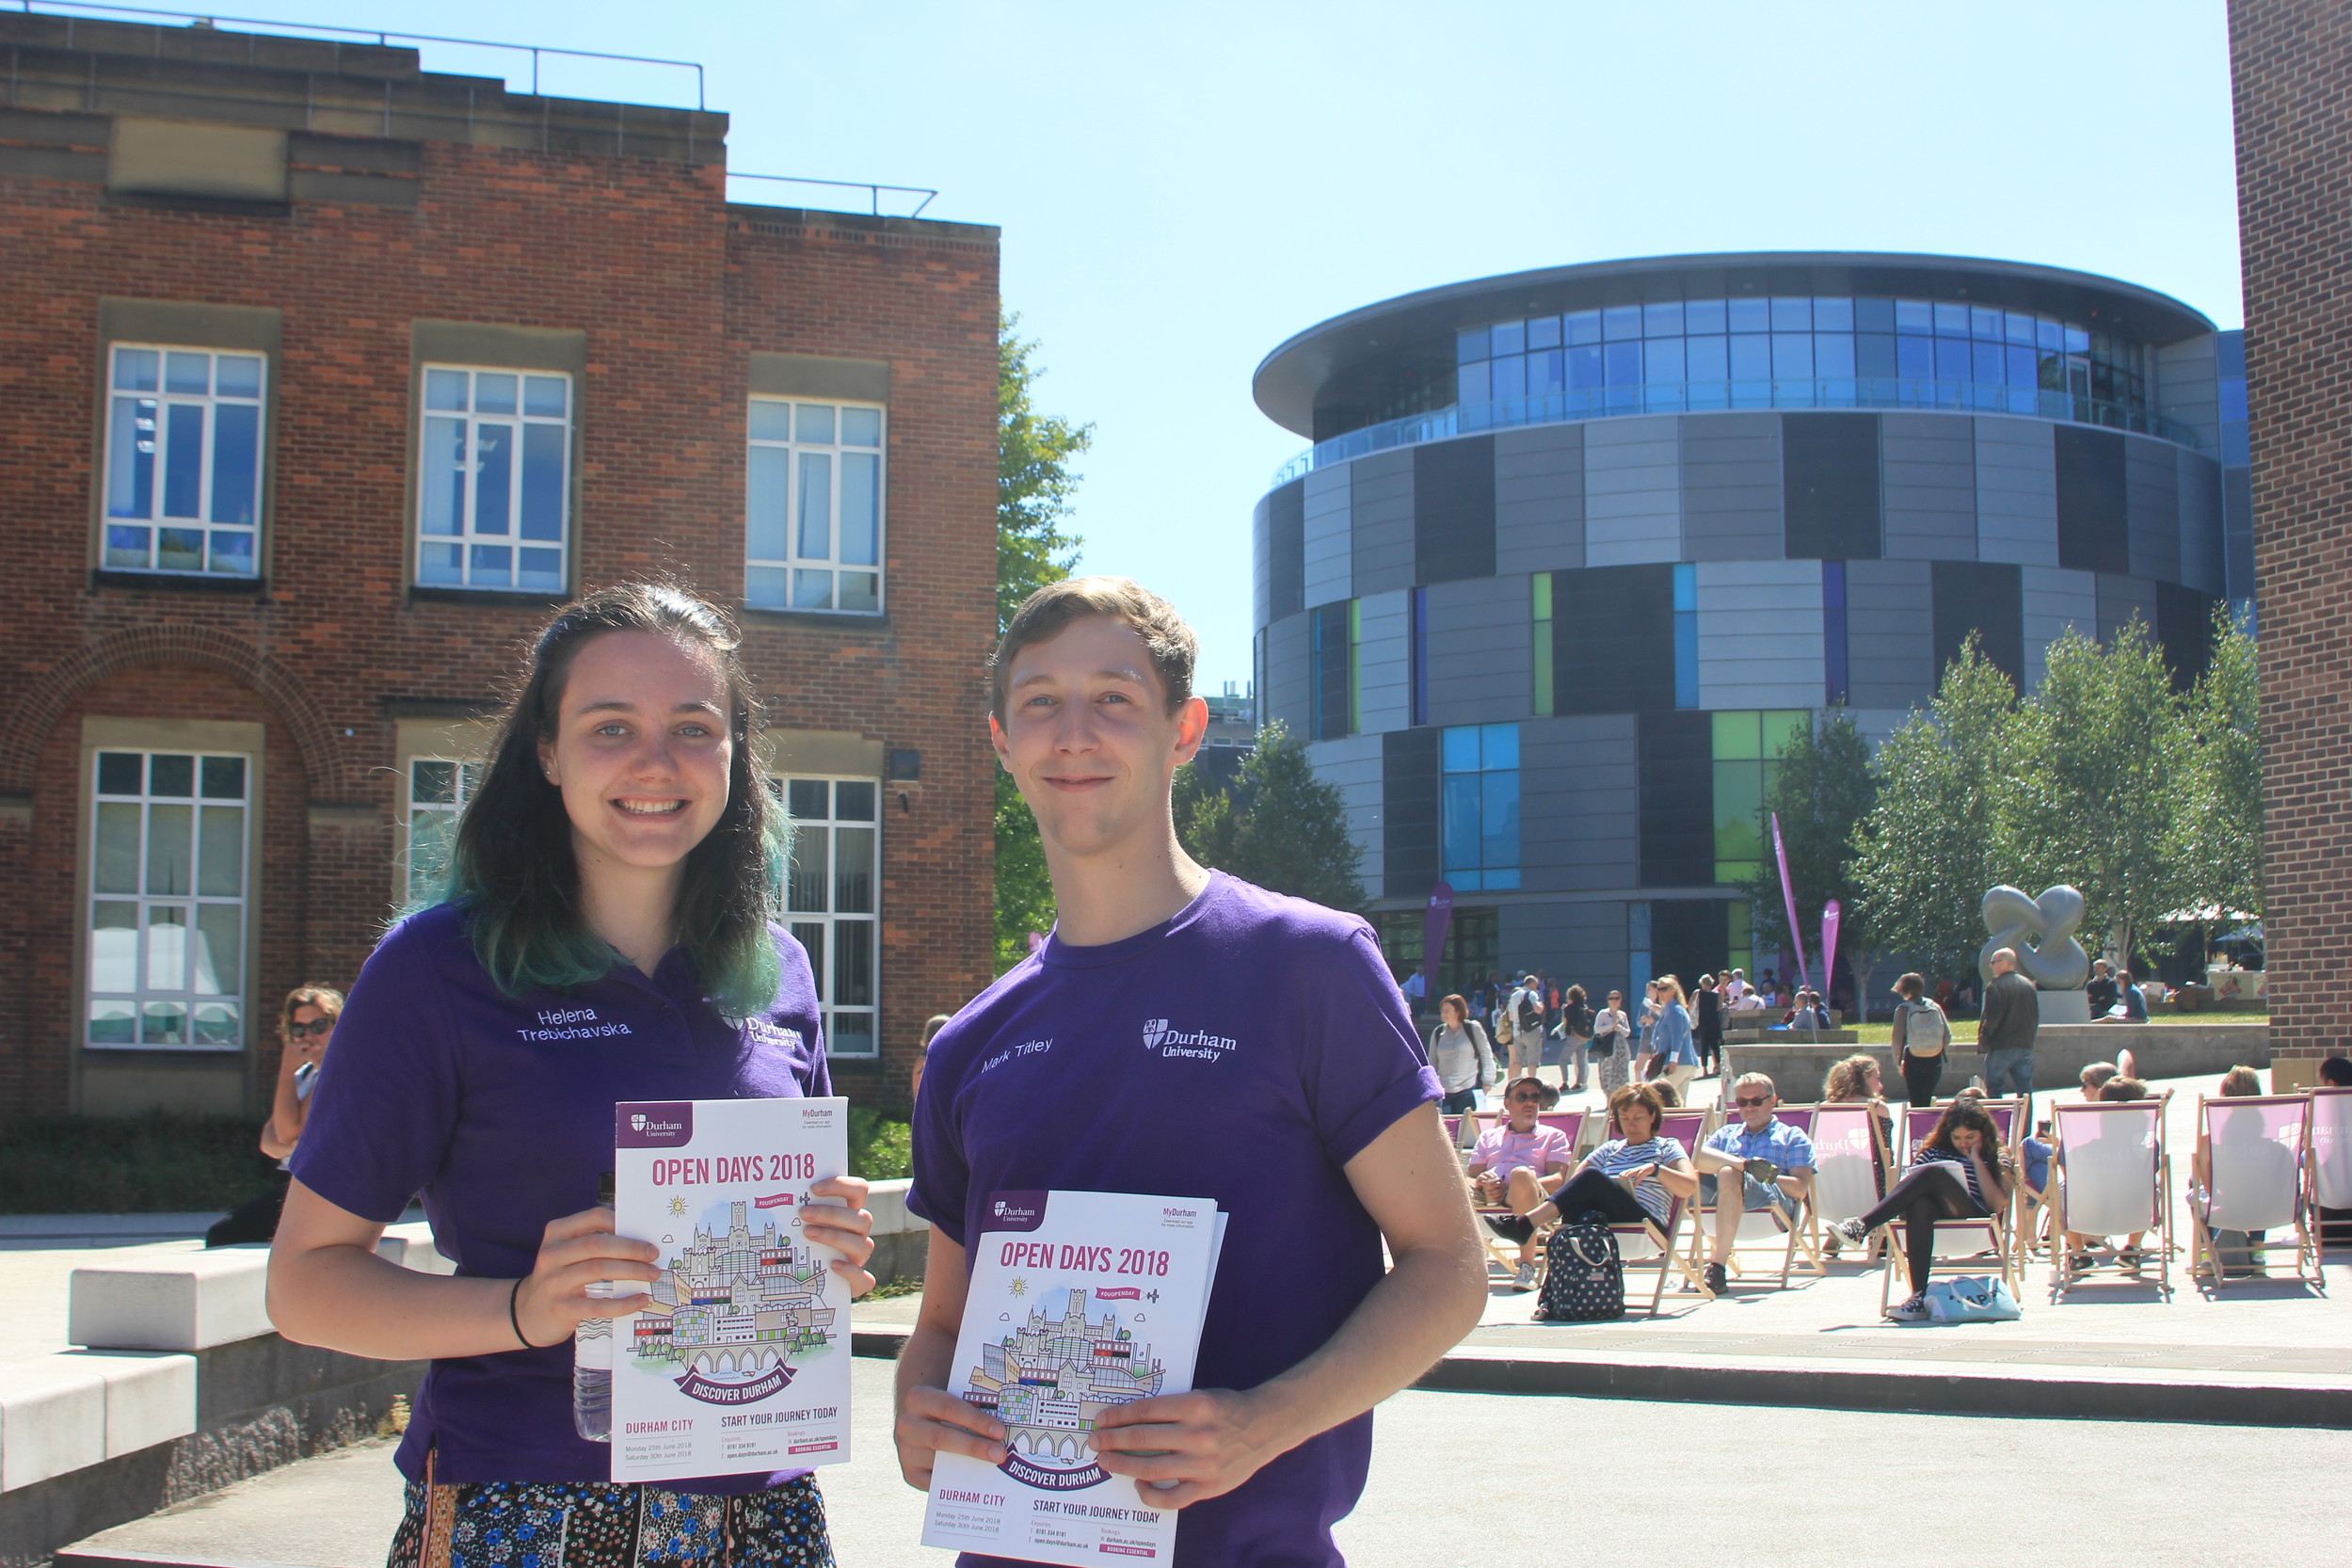 TTwo 一本道无码 students on campus with open day brochures